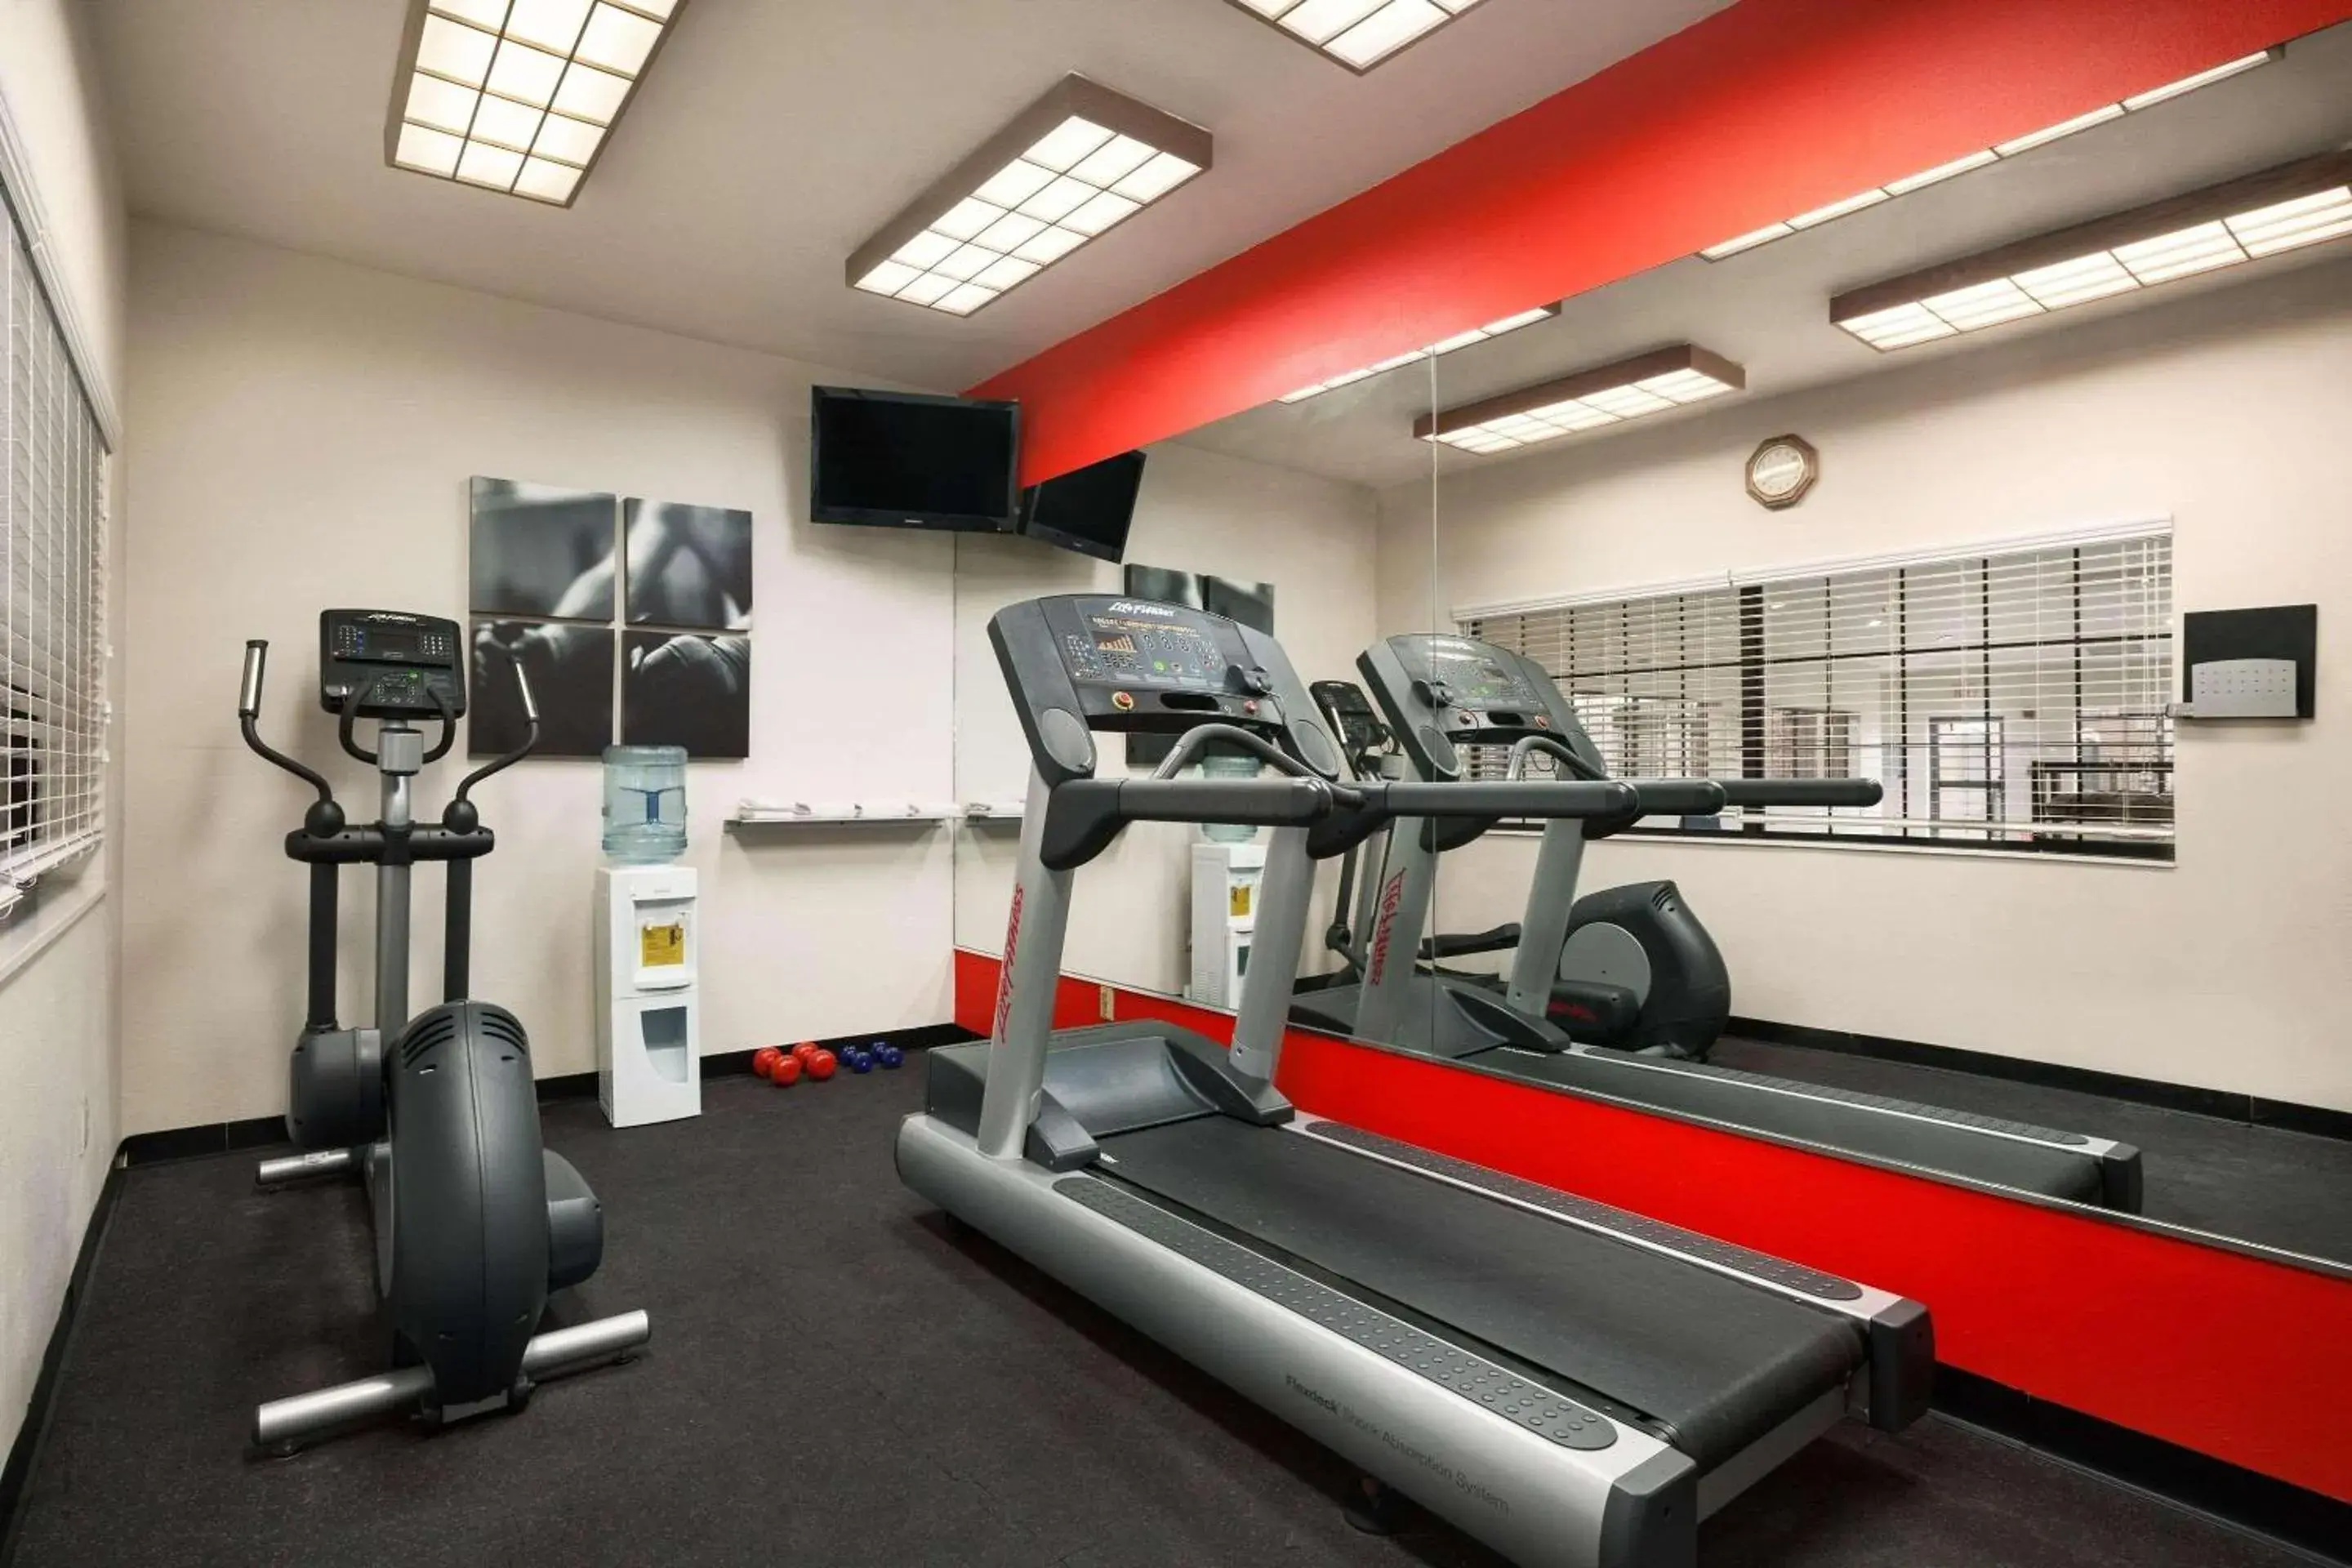 Fitness centre/facilities, Fitness Center/Facilities in Country Inn & Suites by Radisson, Lubbock, TX